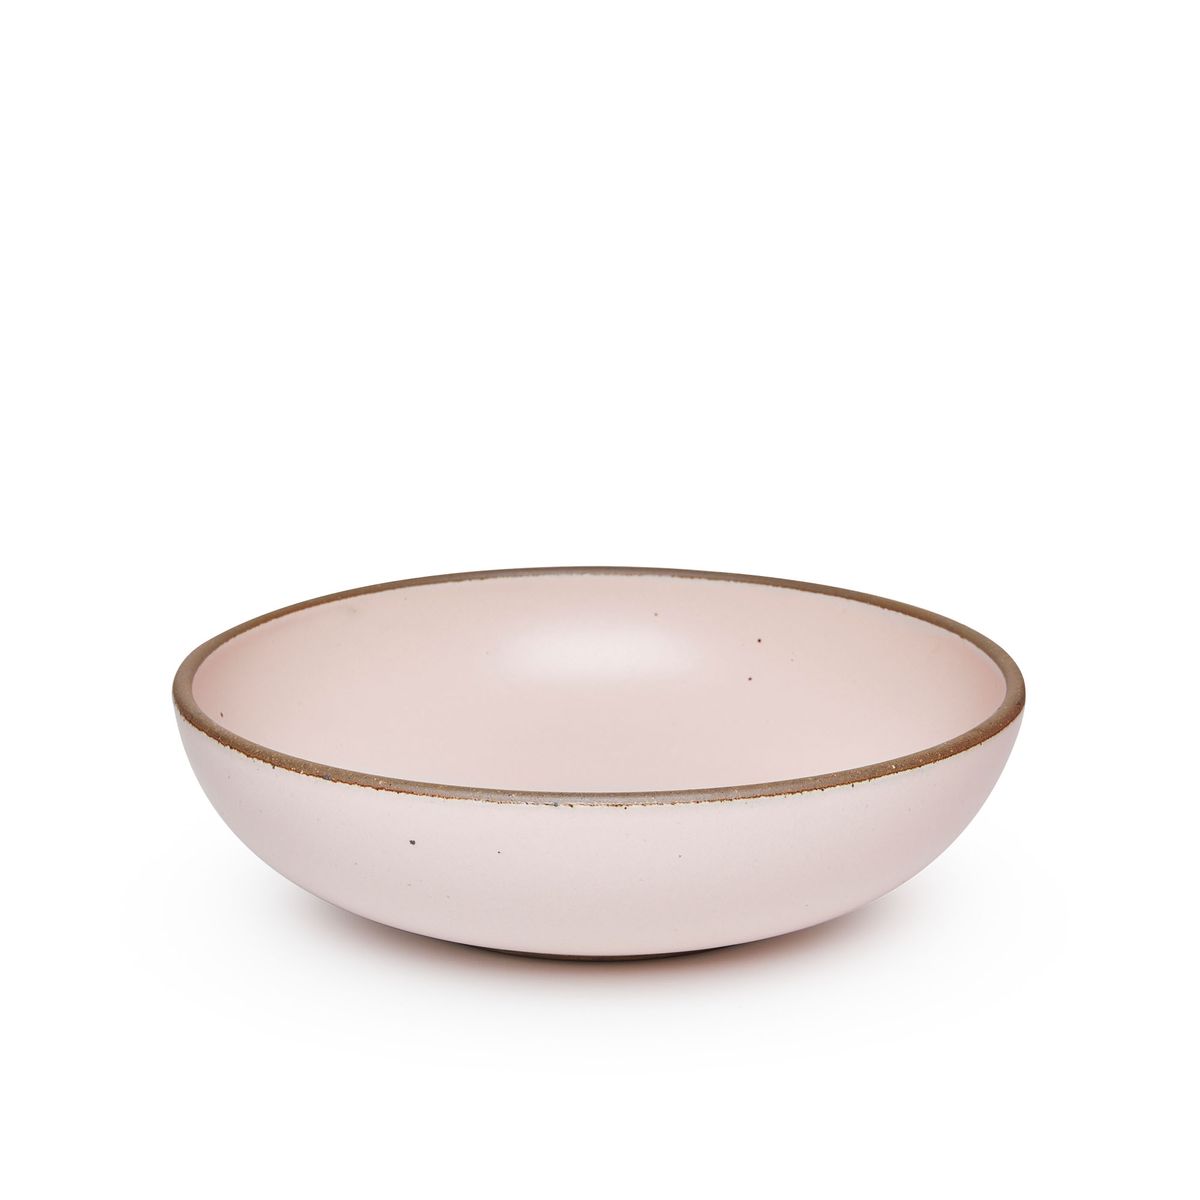 A large shallow serving ceramic bowl in a soft light pink color featuring iron speckles and an unglazed rim